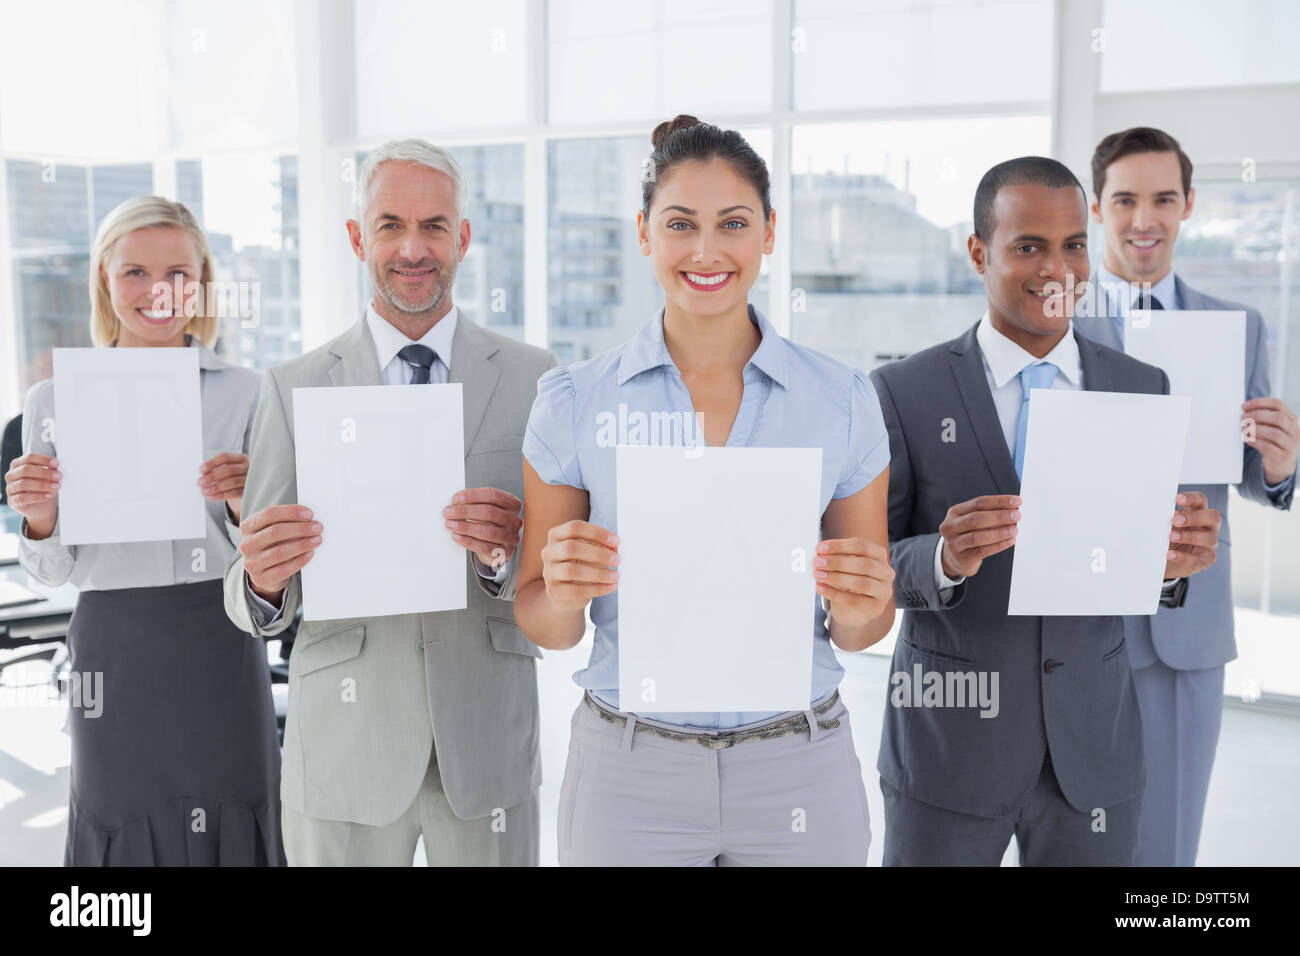 Business team showing blank pages Stock Photo